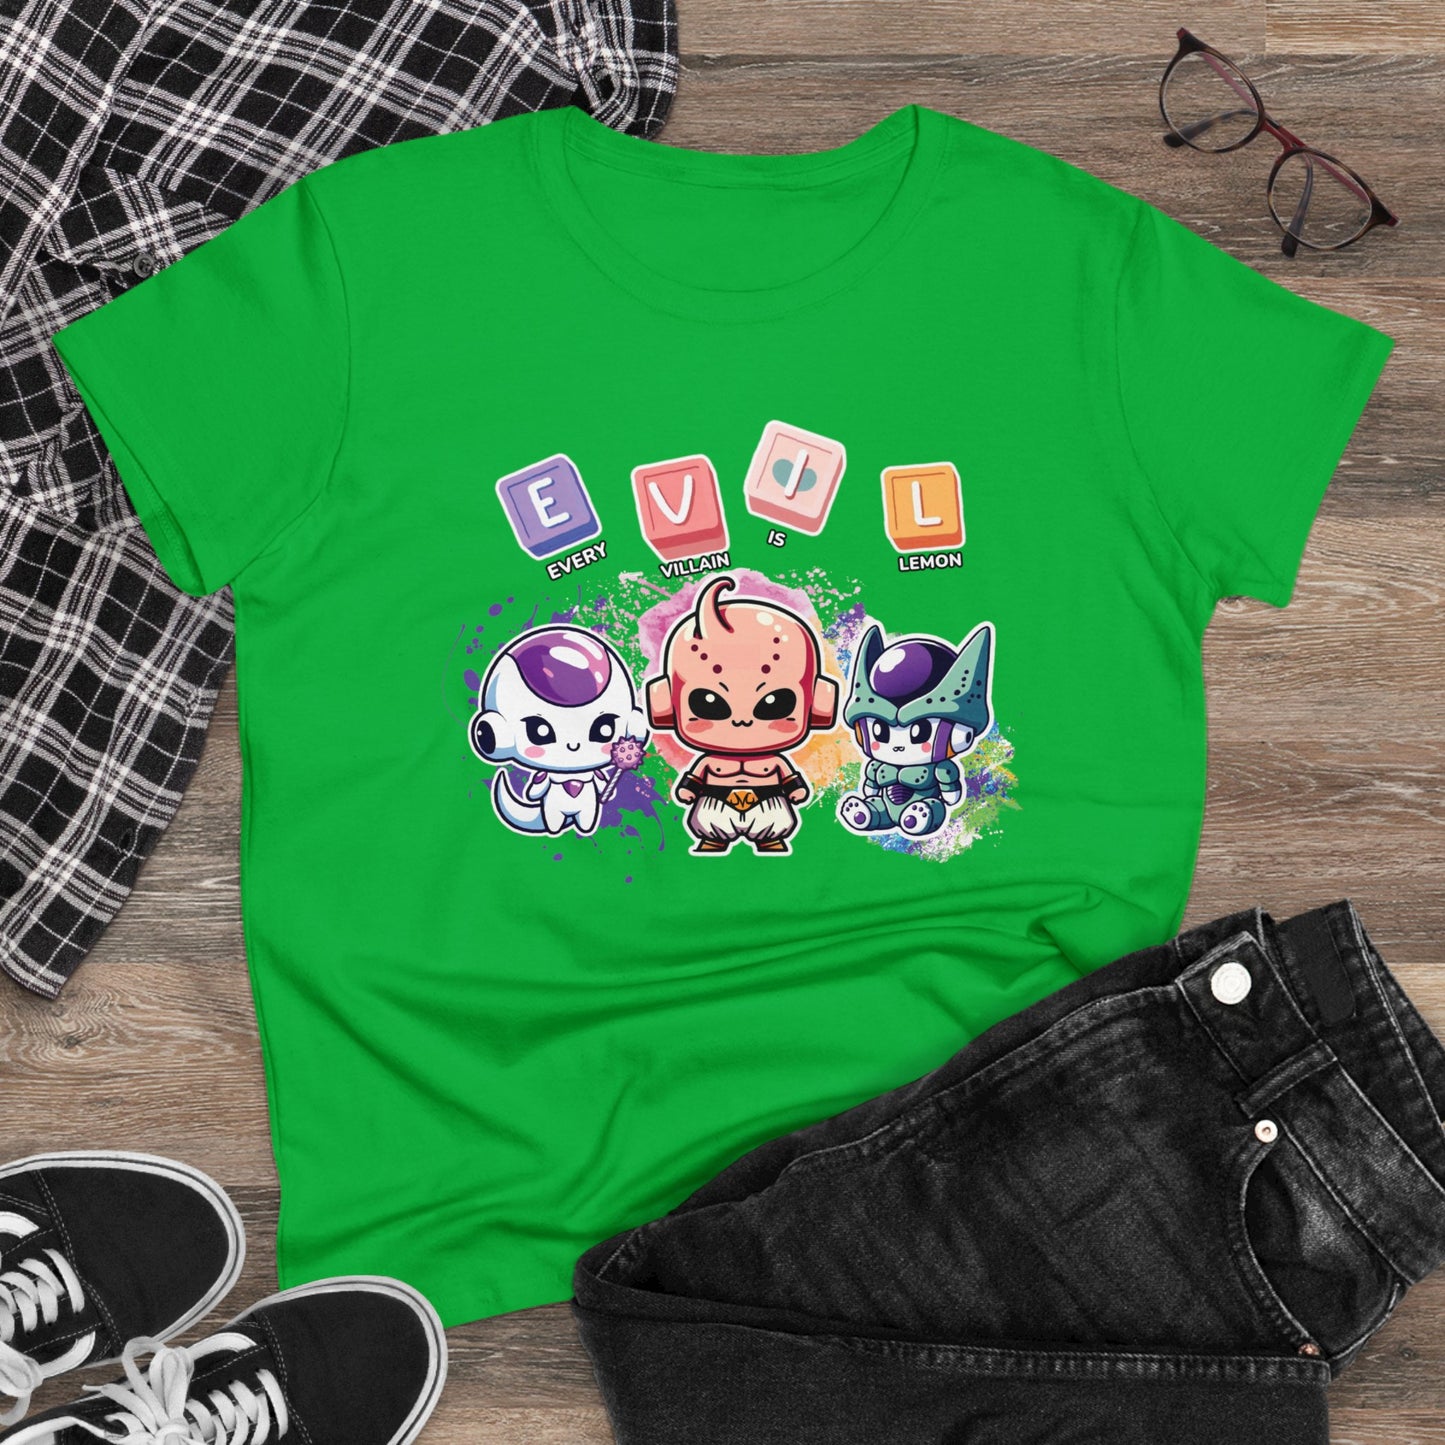 Tiny Tyrants of the Galaxy: Every Villain Is Lemon  – Death by Cuteness!, Women's Cotton Graphic Tee